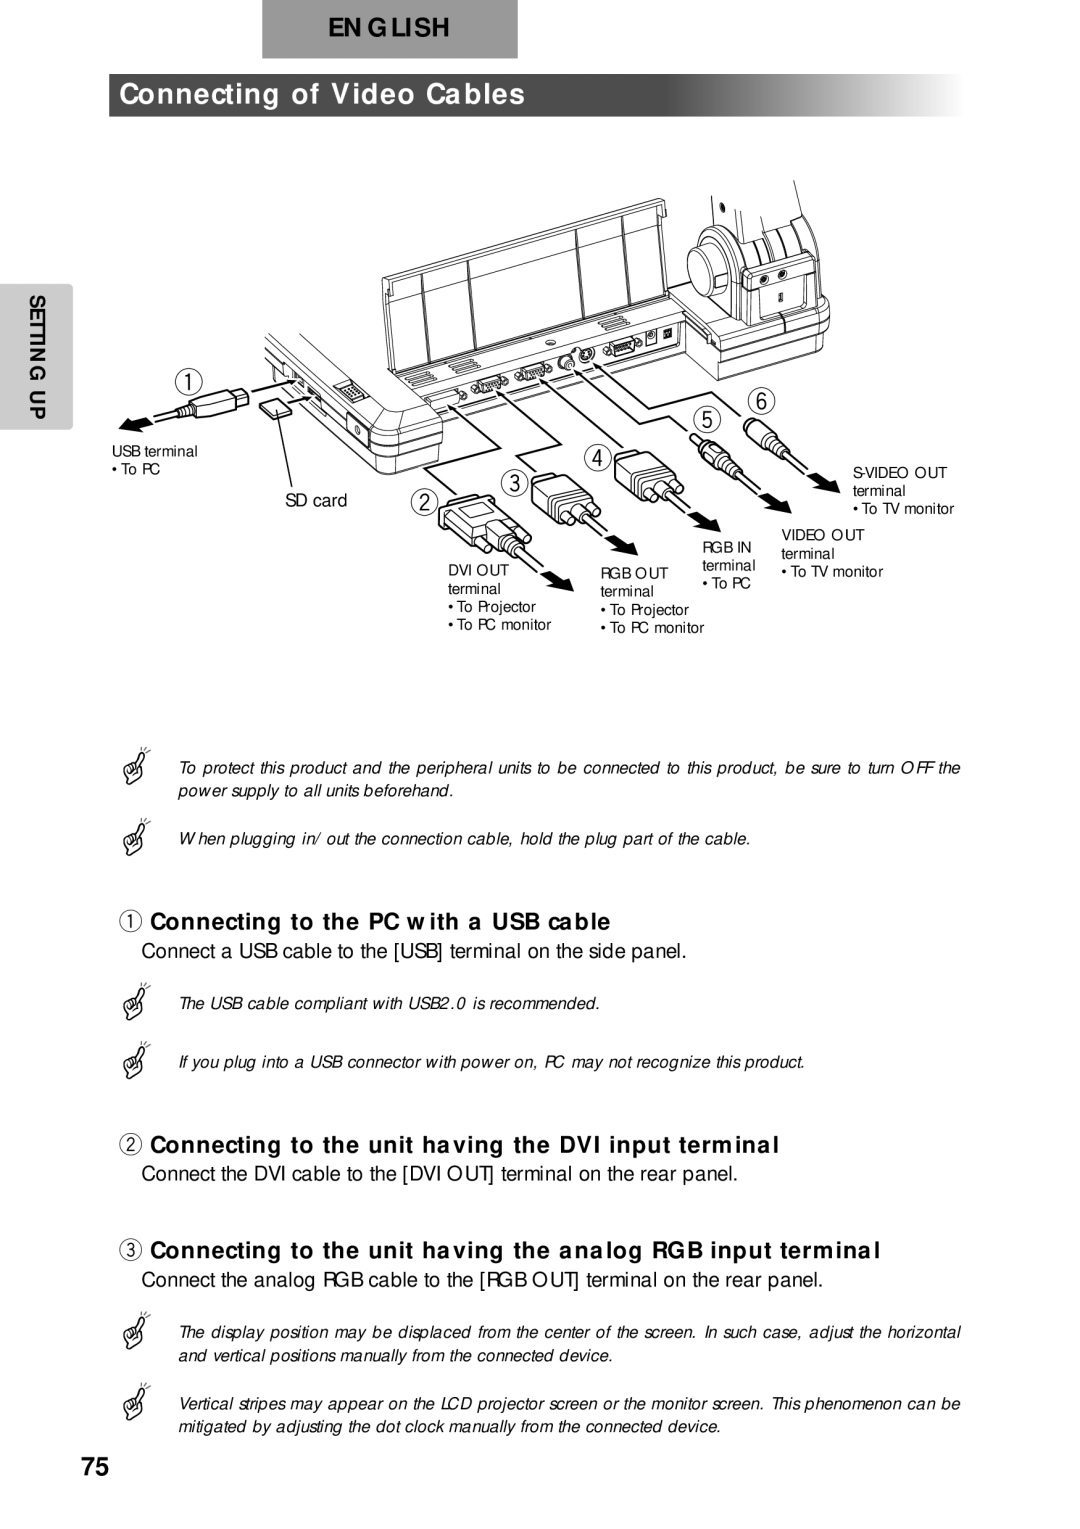 Elmo p10 instruction manual Connecting of Video Cables, English 